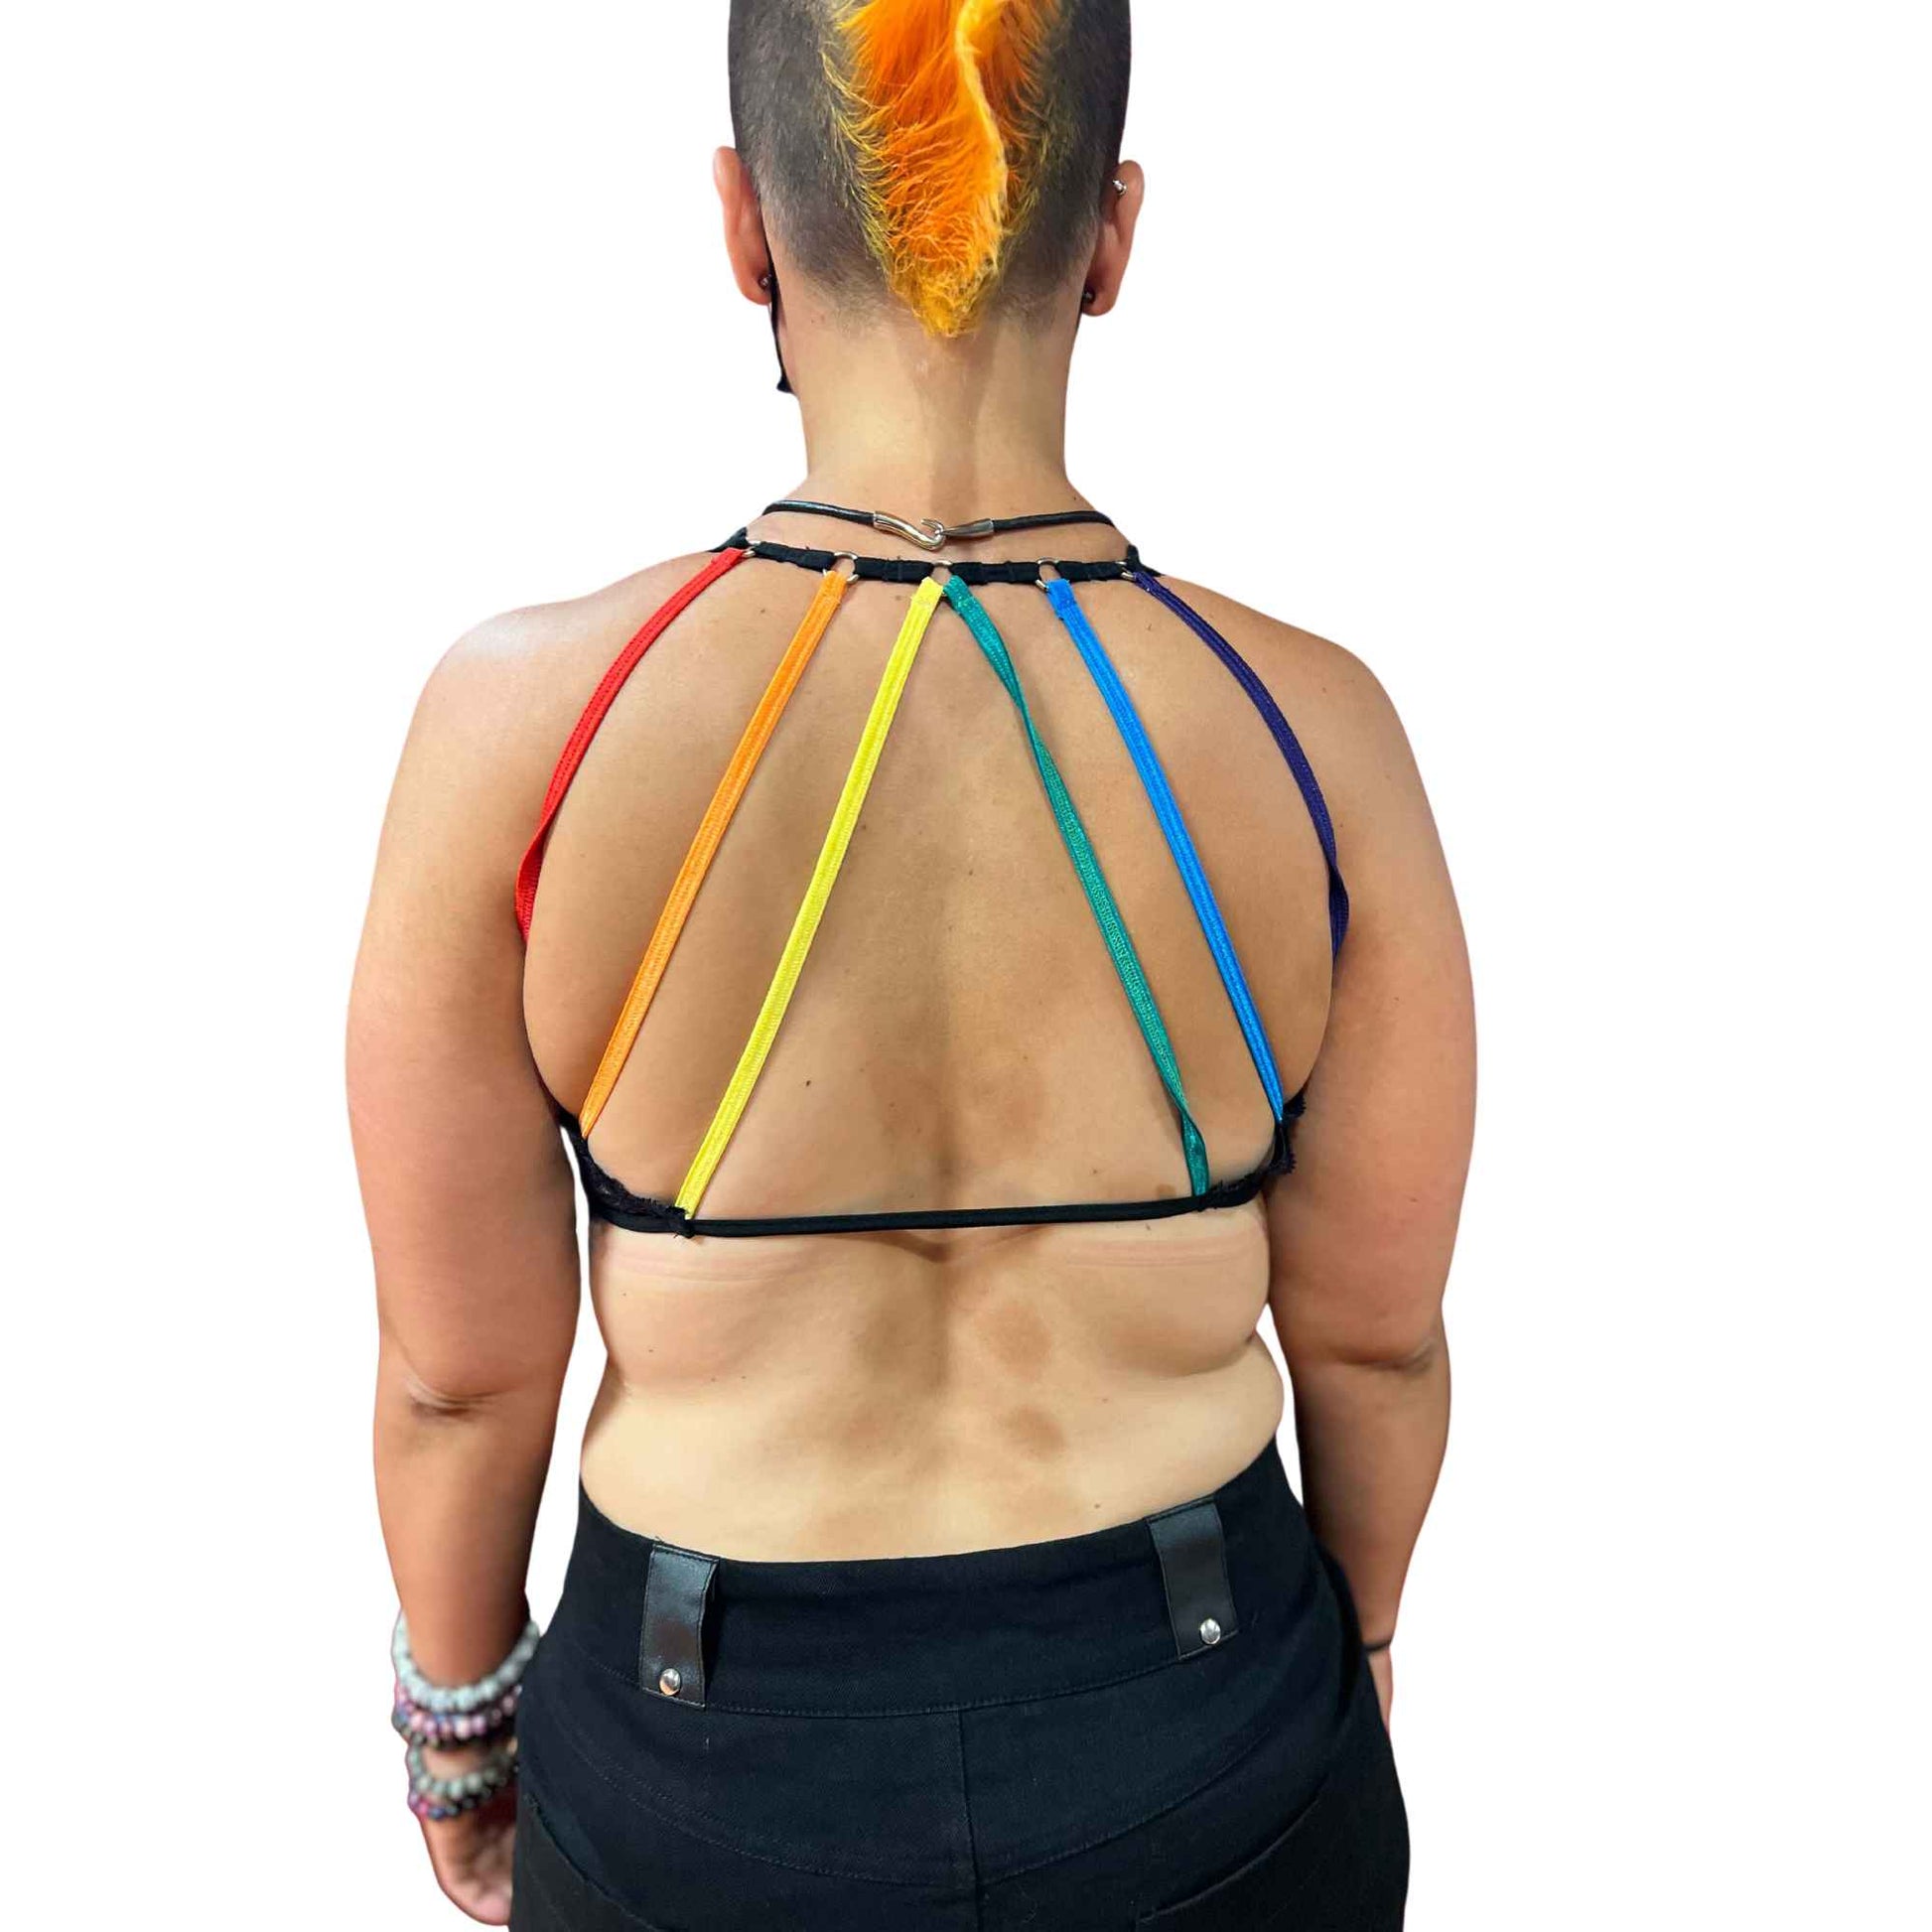 A model wearing the rainbow pride lace lace strap bra, rear view.